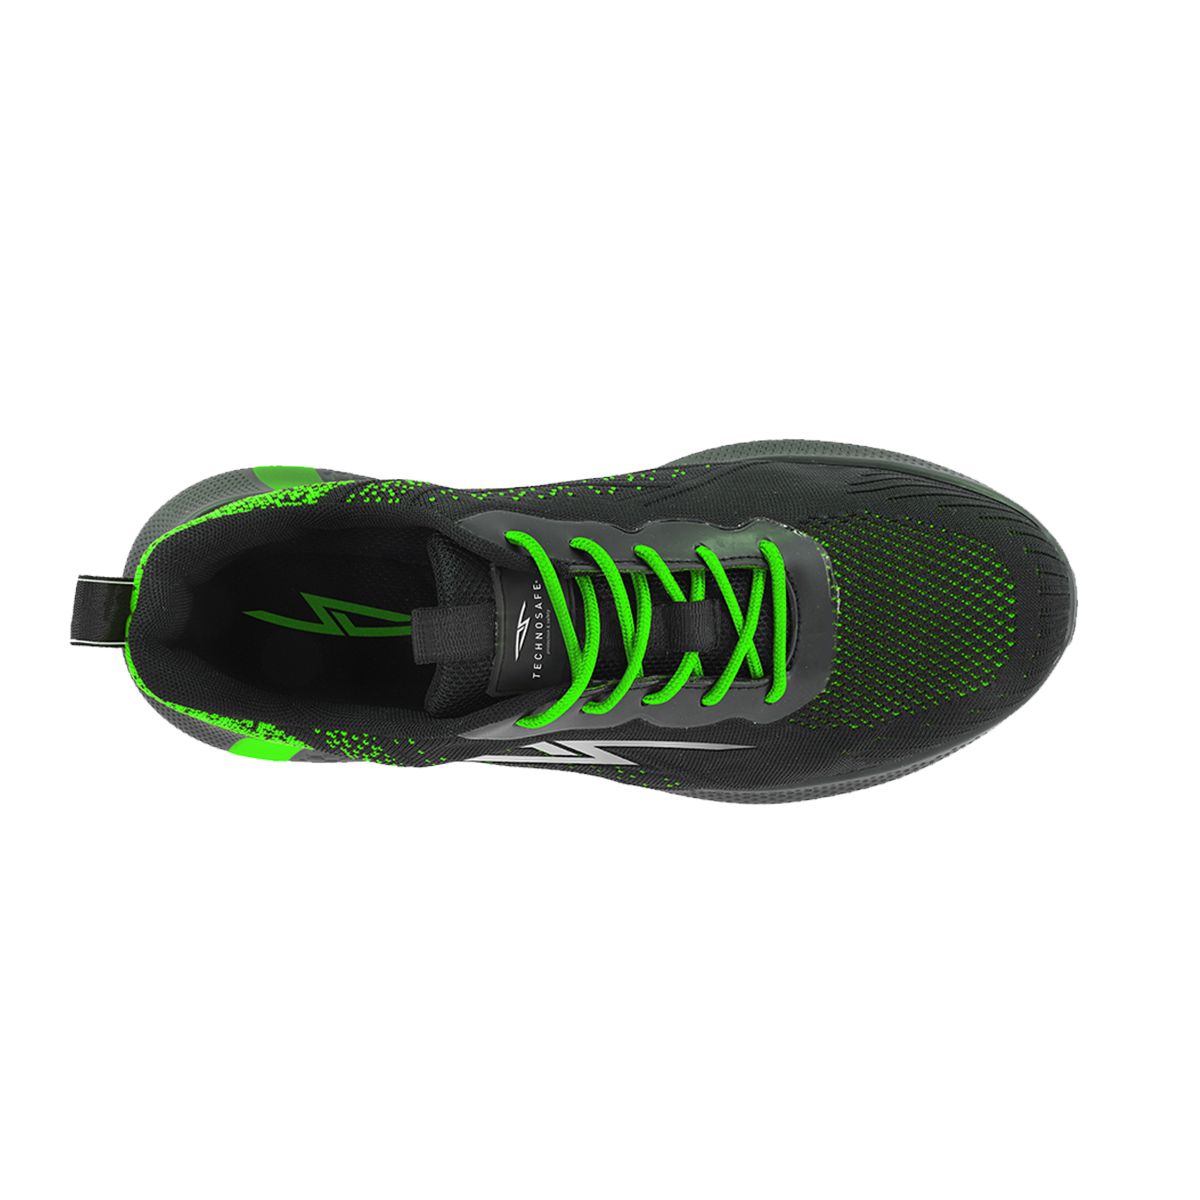 Neon Safety Shoes Green Shock S3 Low